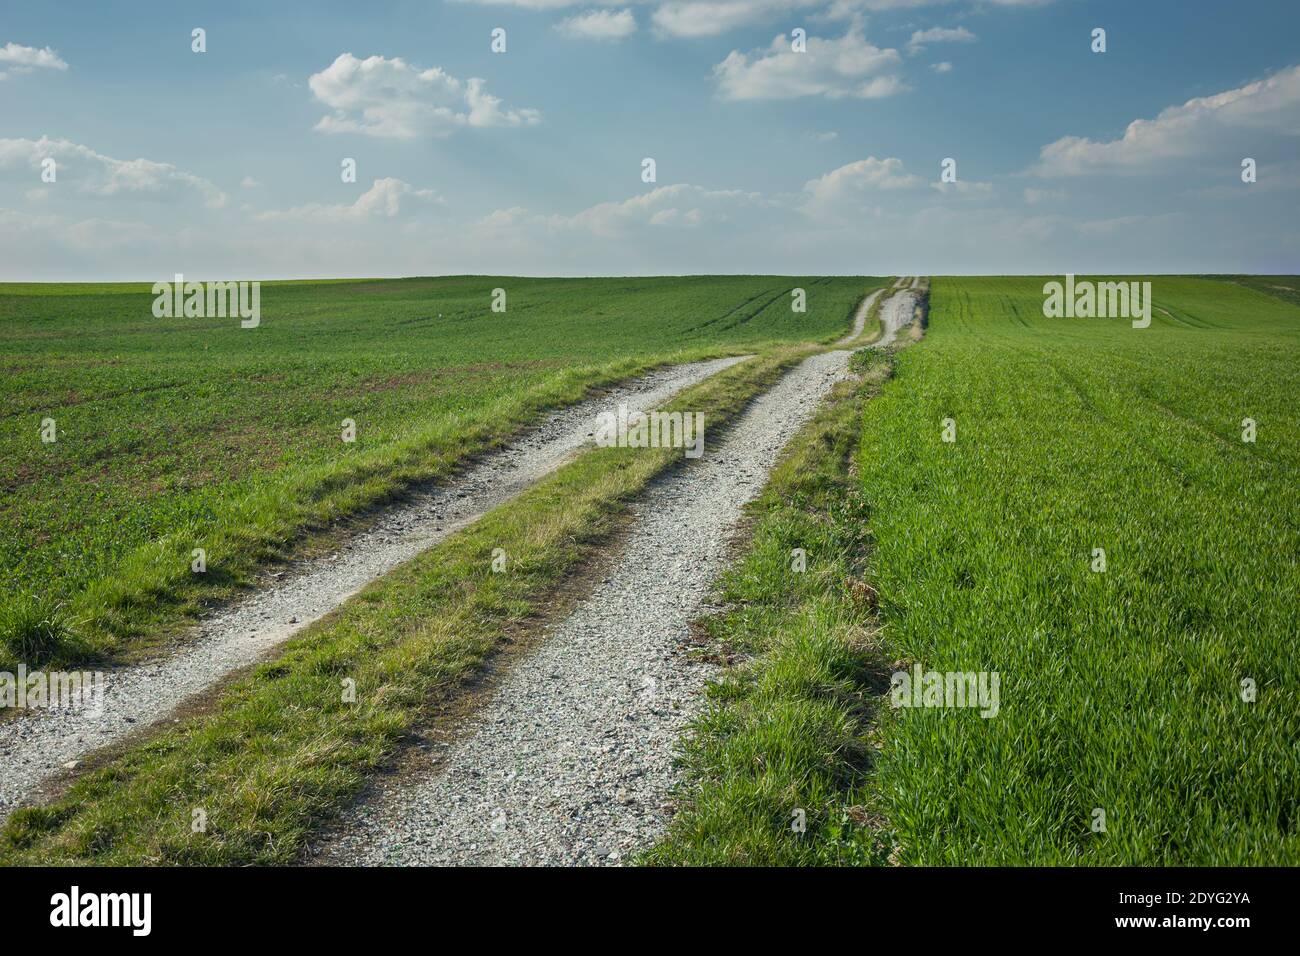 Rural road through a green field on a hill, spring view Stock Photo